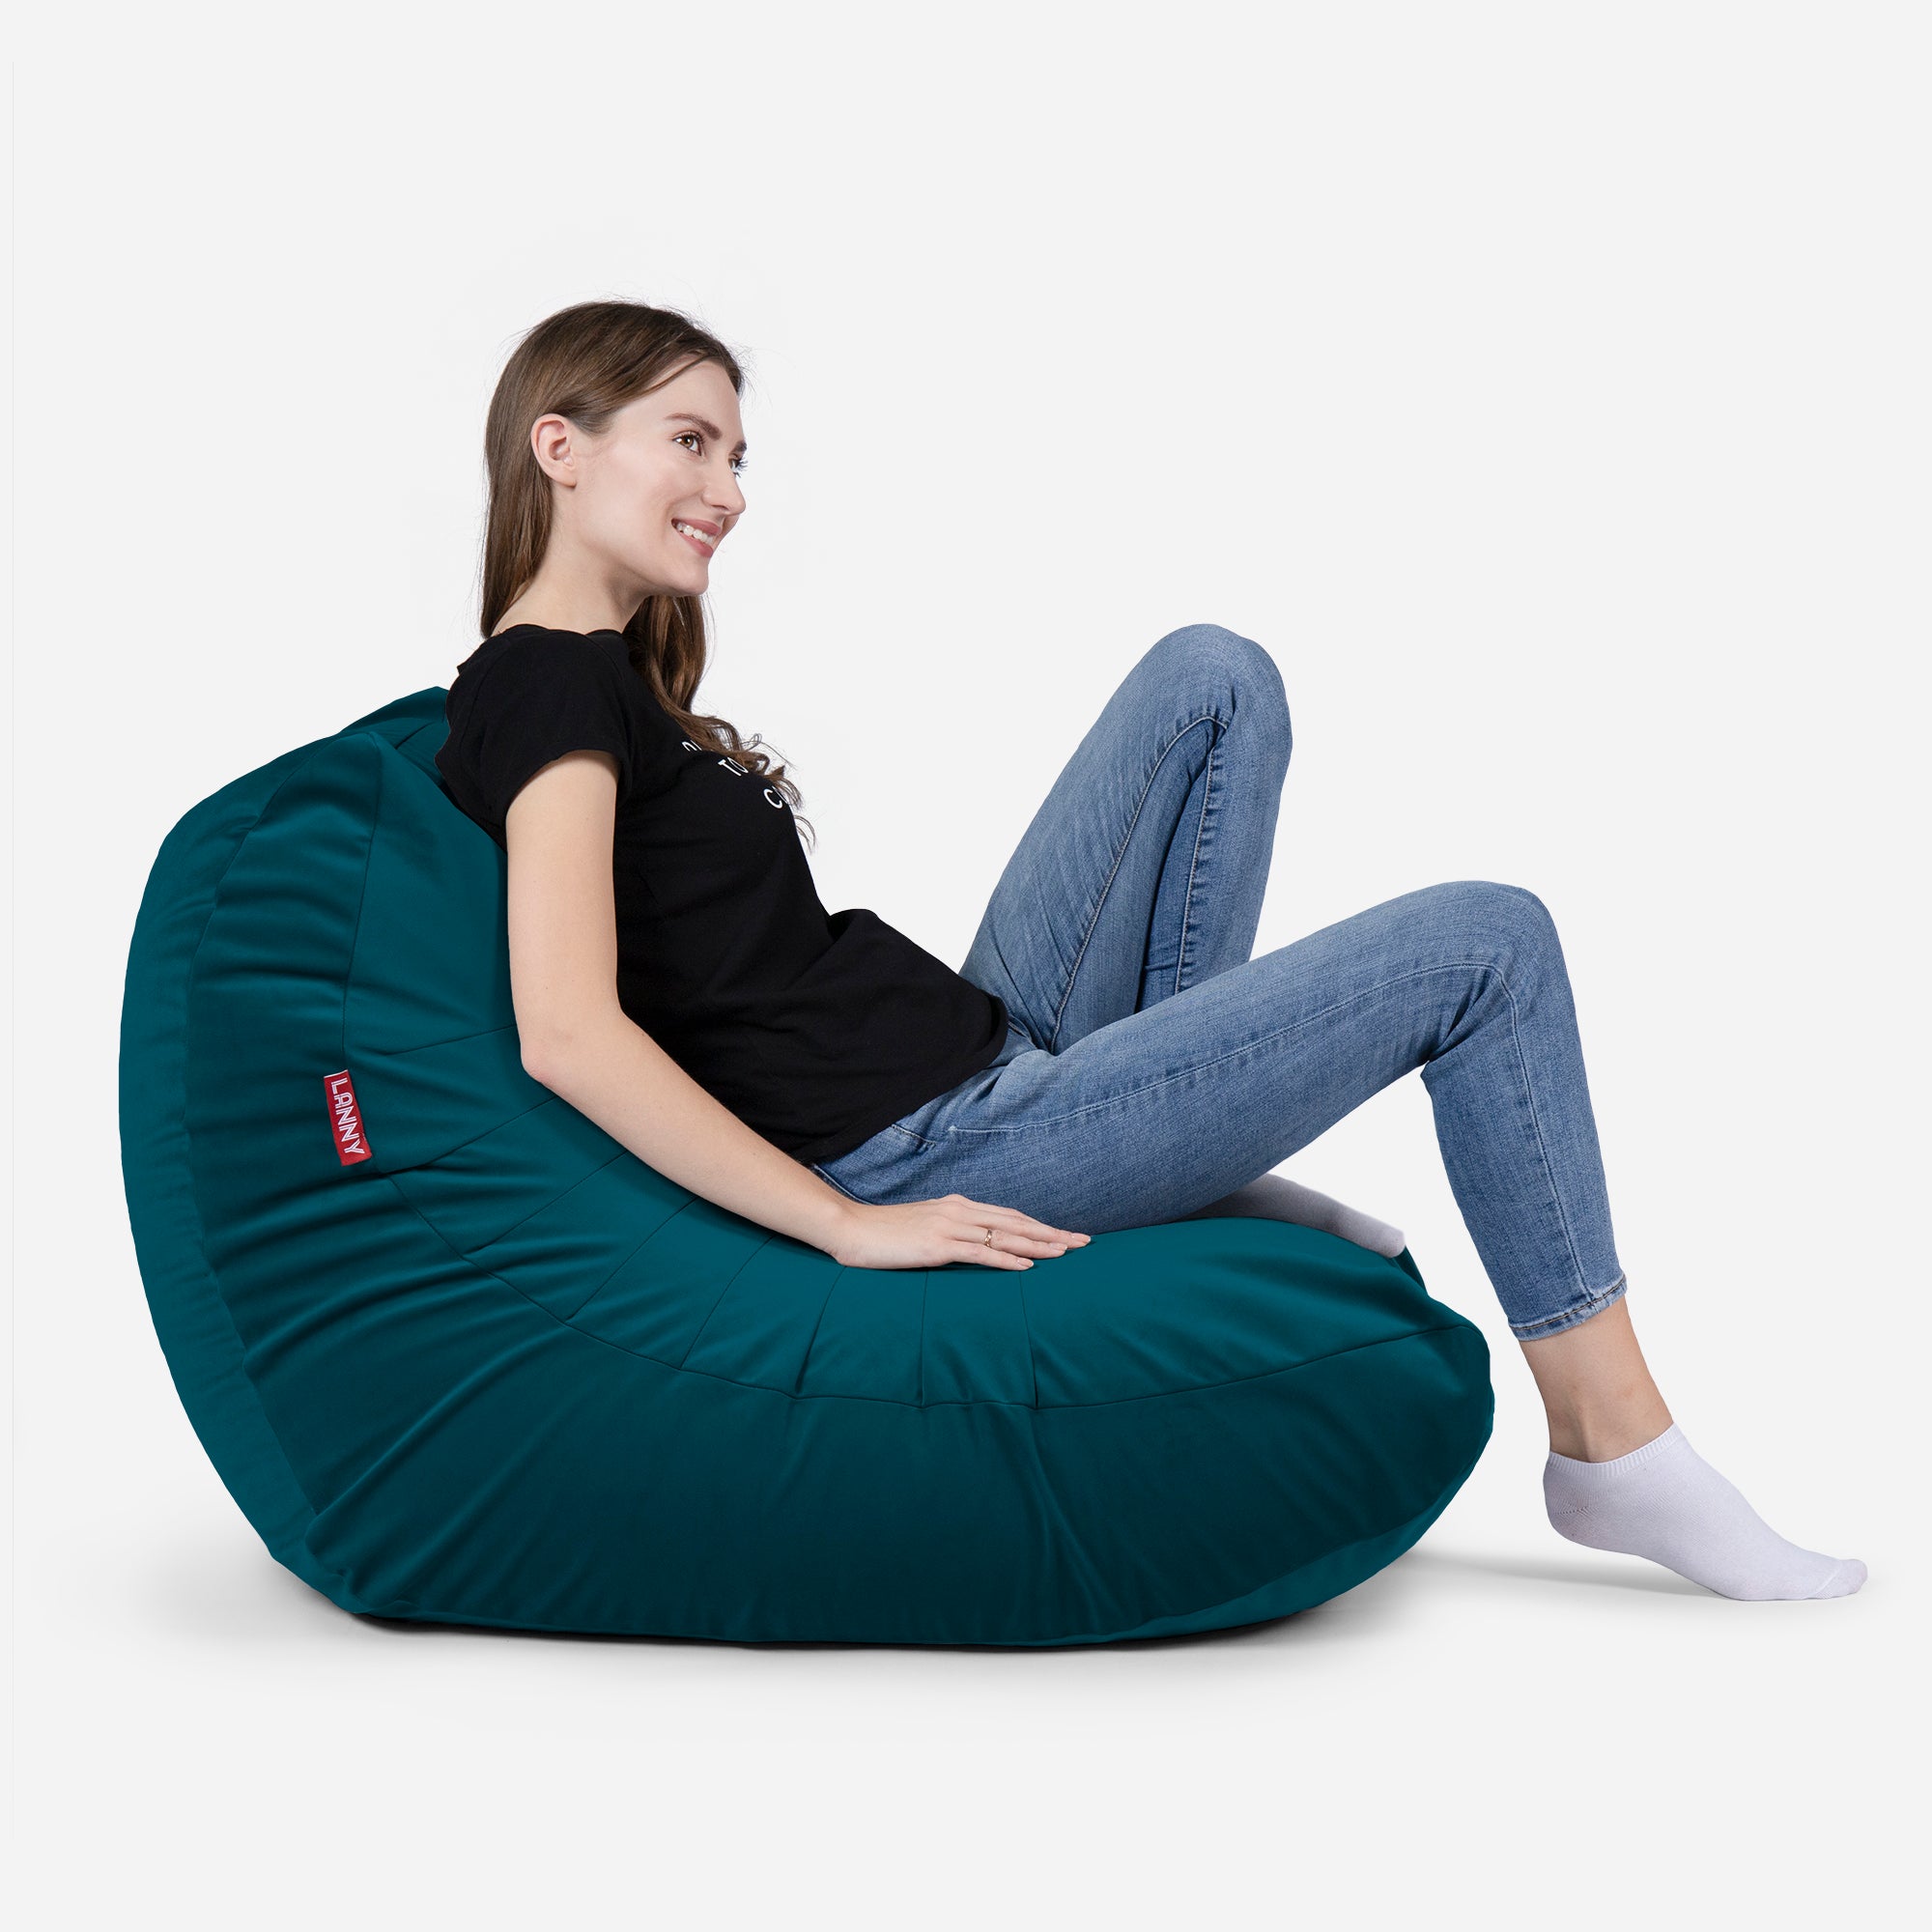 Beanbag Curvy Design aqua color with girl seating on it 